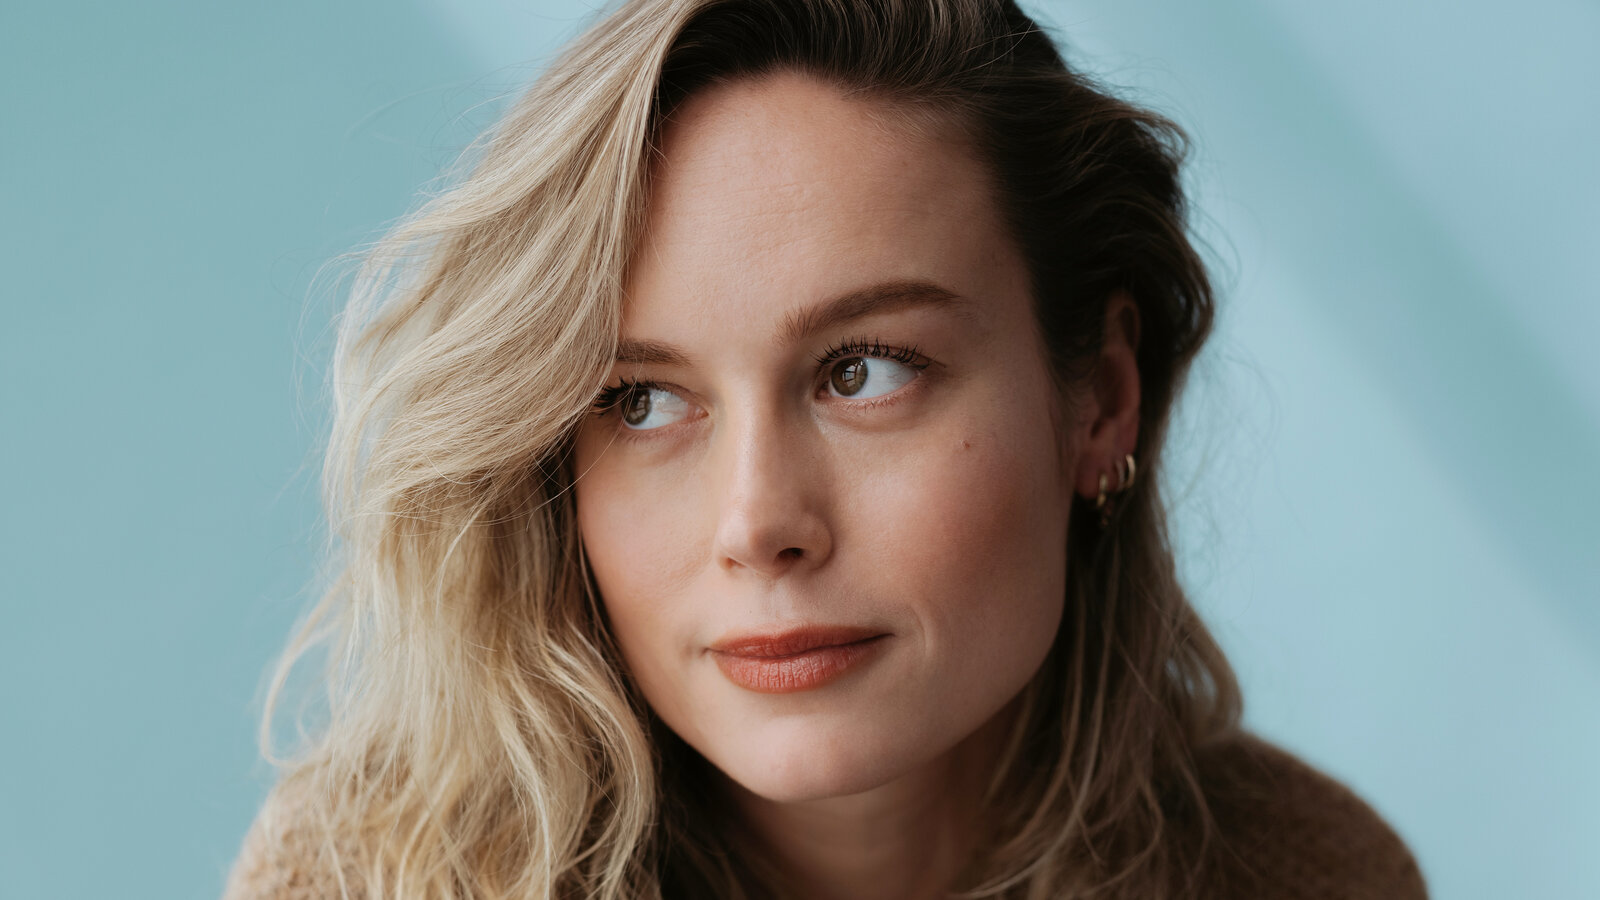 Brie Larson 2019 Photoshoot Wallpapers